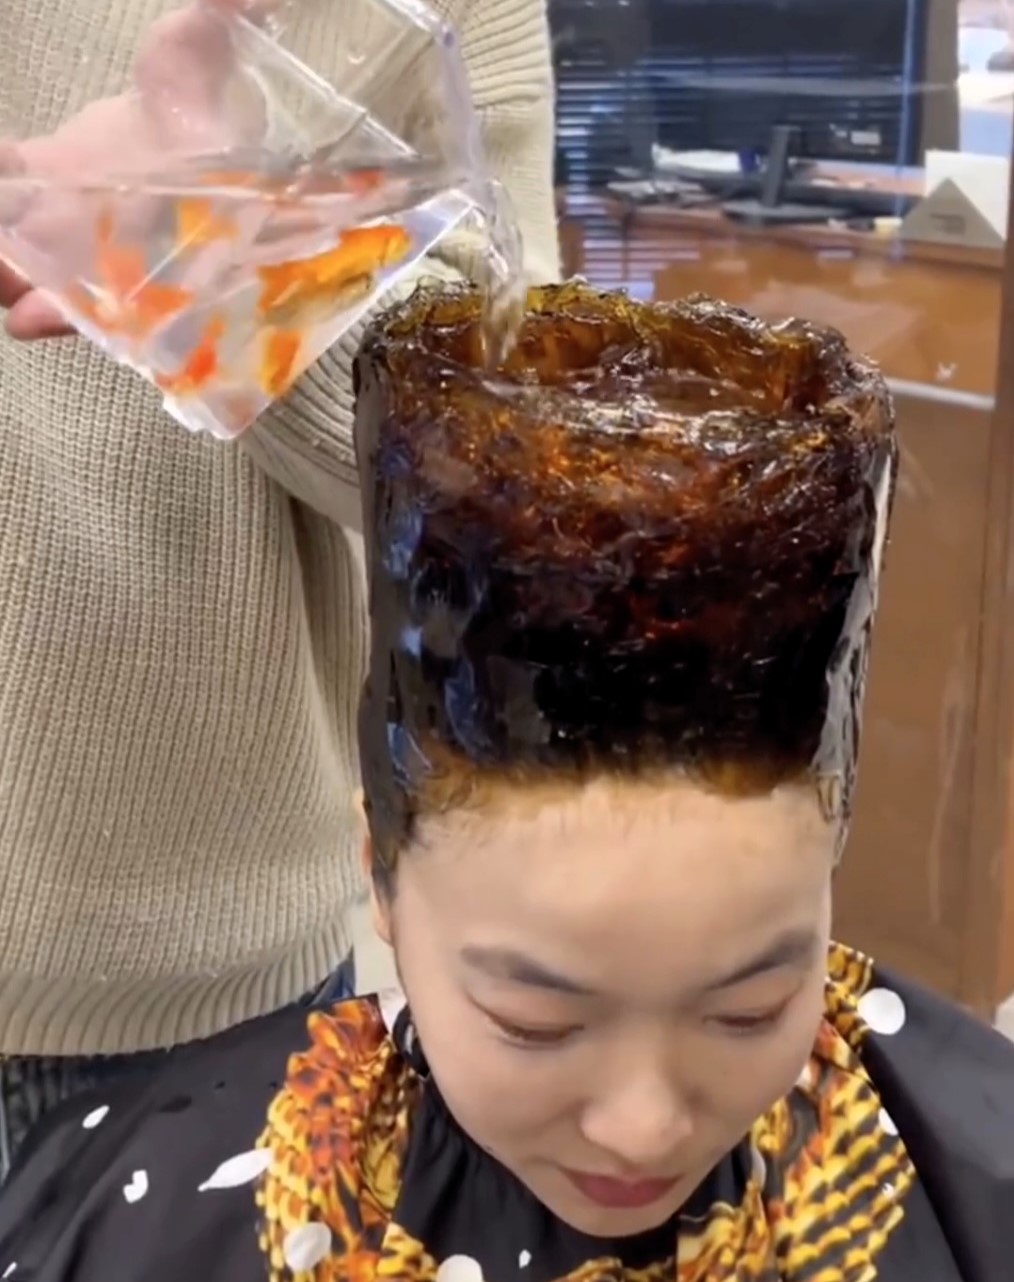 A daring woman in China gets a bold haircut, with her hair fashioned into a tall bowl and live goldfish poured into the hollow. The unusual style, done by hairstylist Lao Qiao, sparks mixed reactions online, with some finding it creative while others criticize it as cruel.